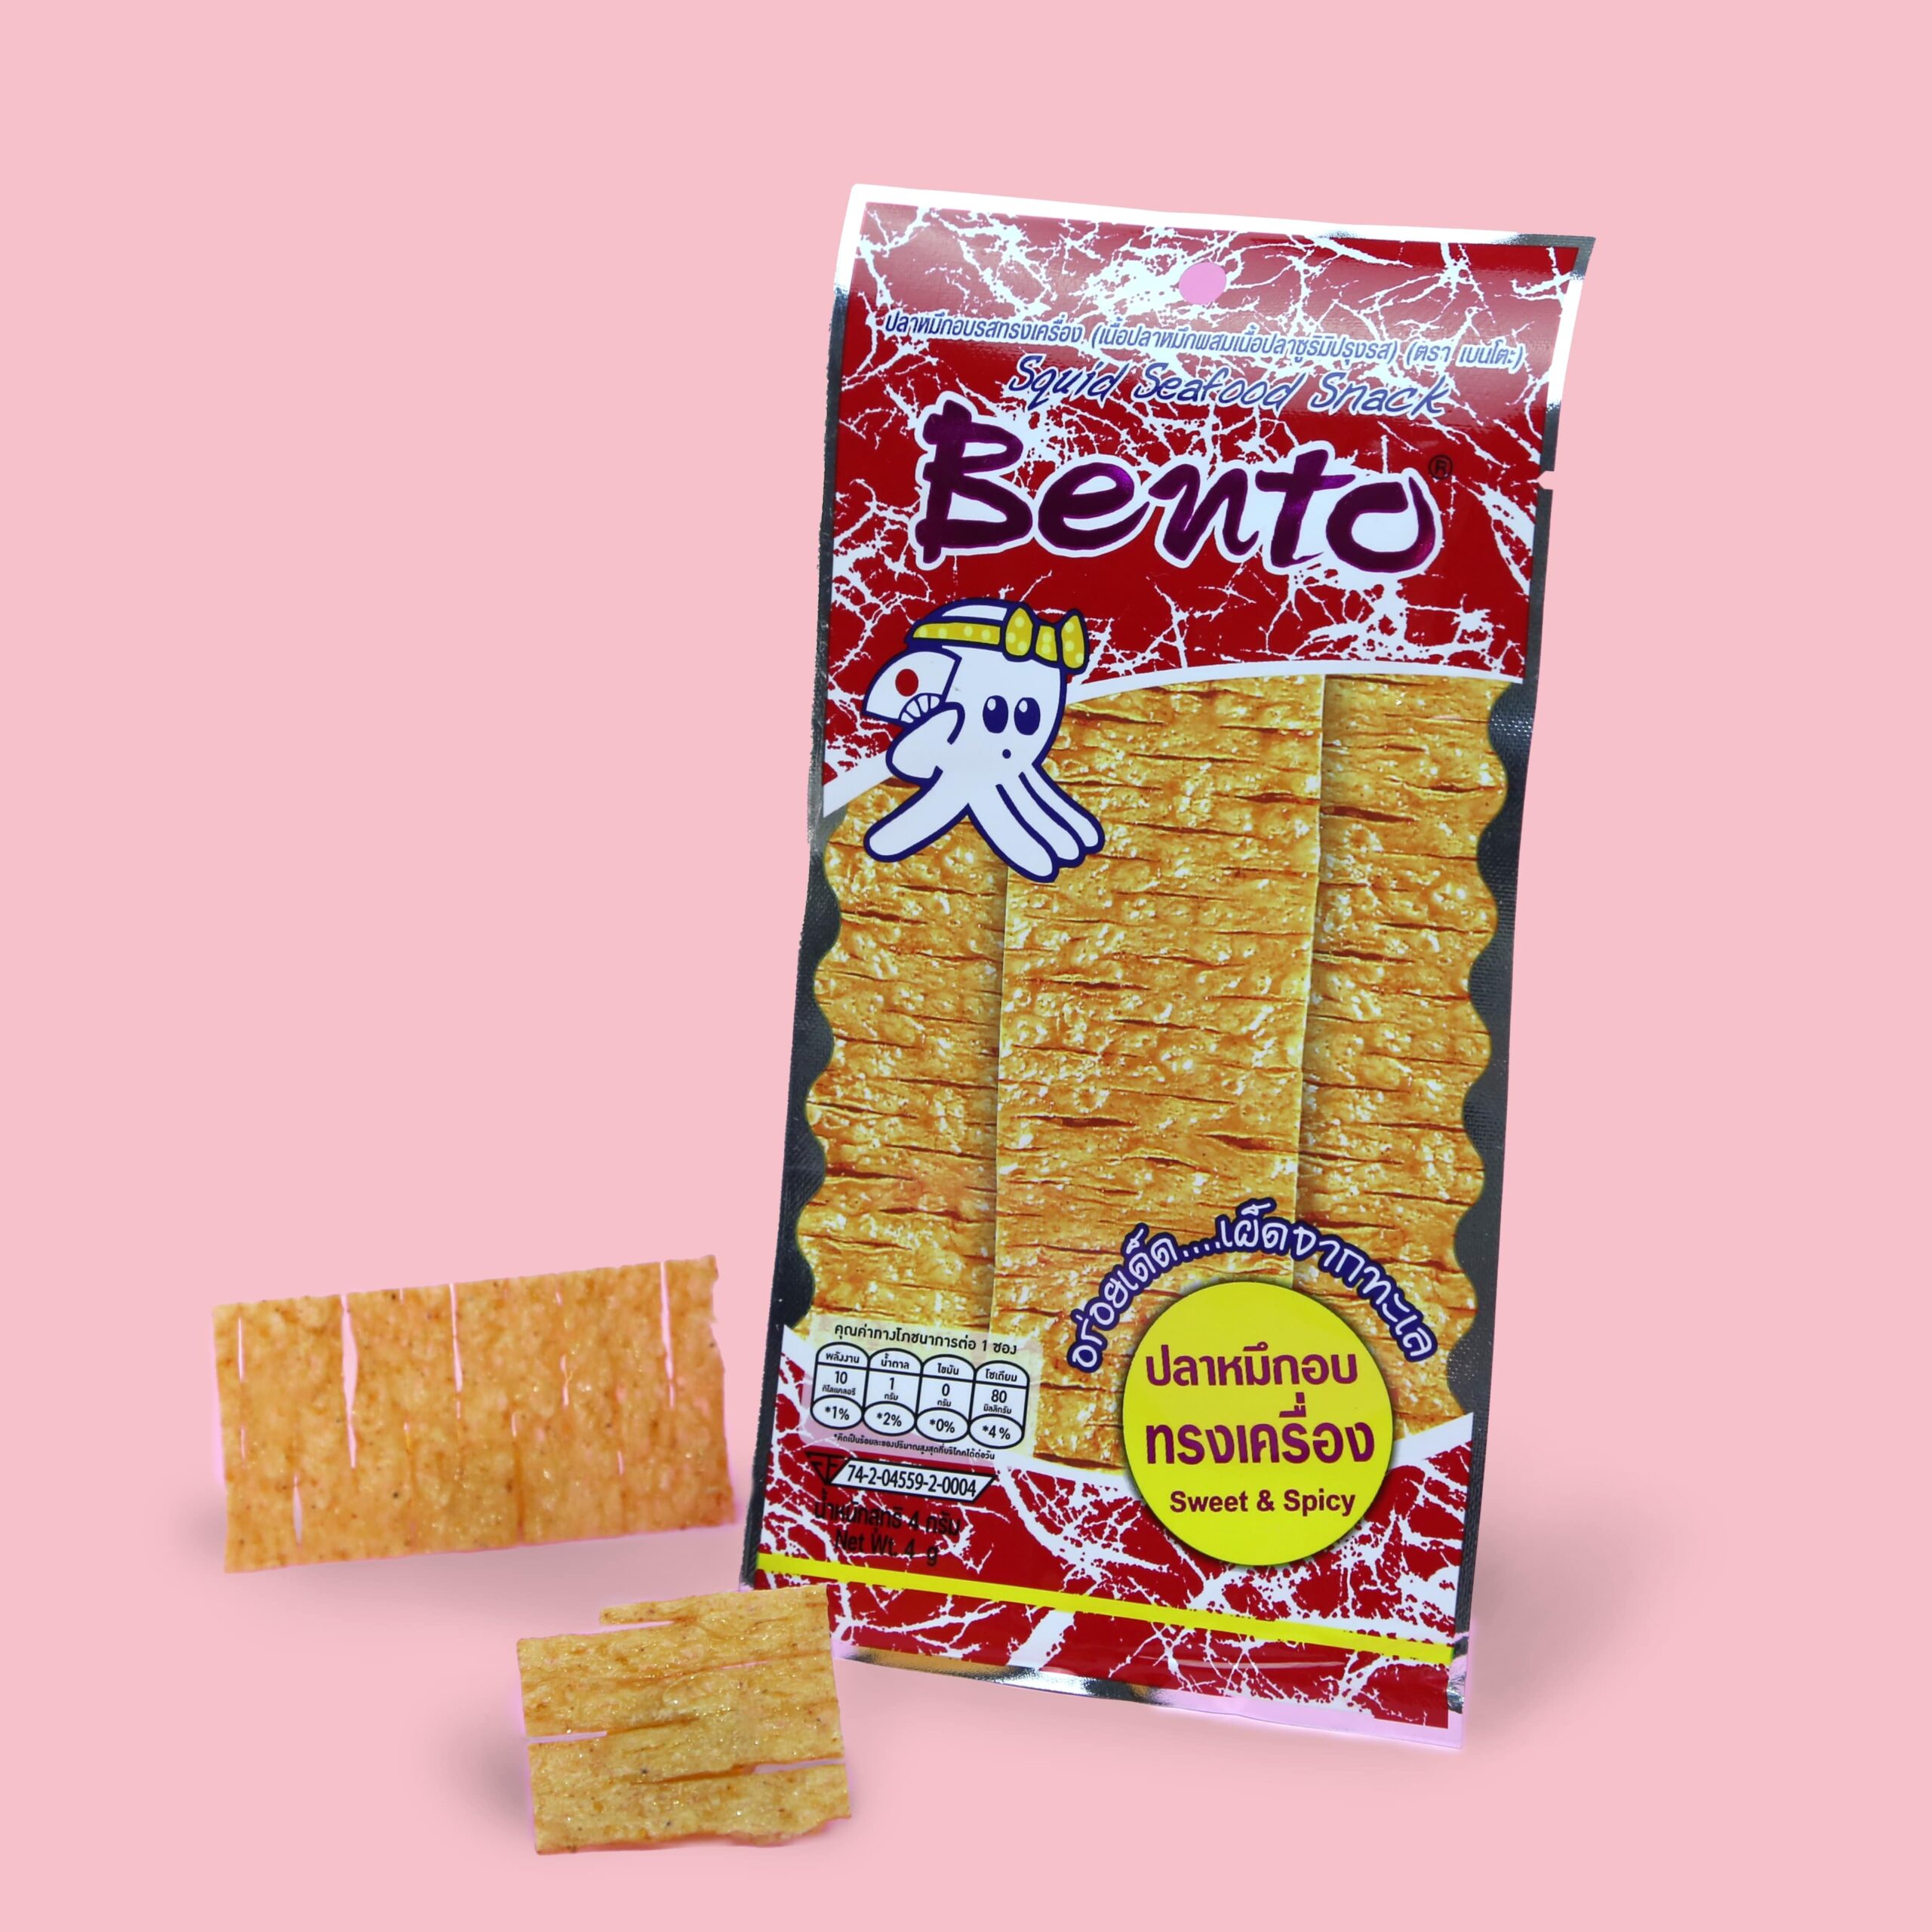 Bento Spicy seafood snack included in Heap Brand authentic Thai snack subscription box. Famous Thai souvenir and must-buy spicy snack